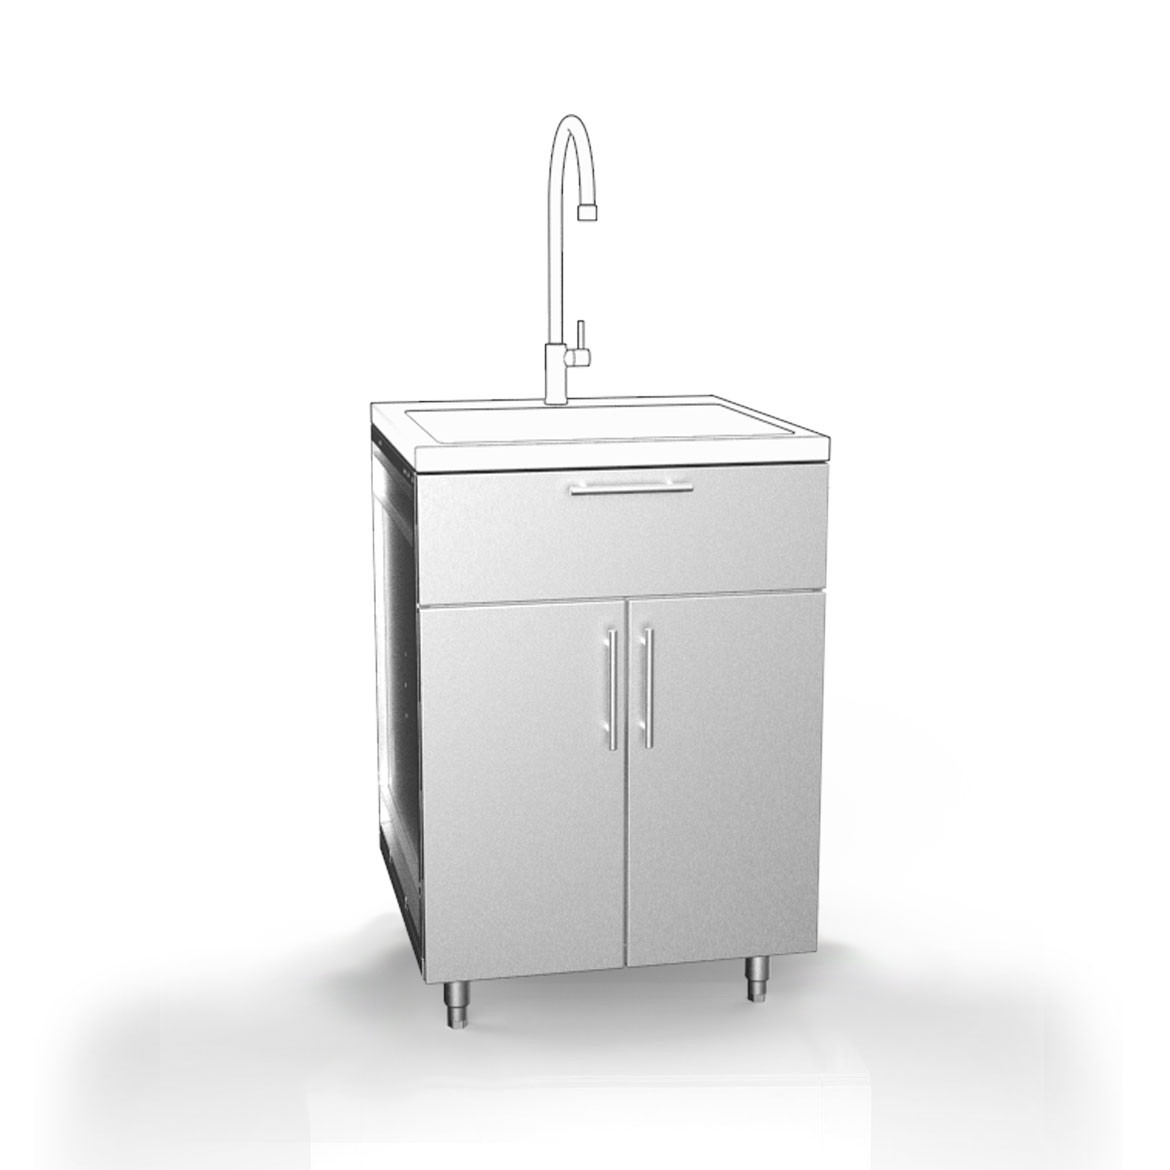 Outdoor Kitchen Sink Cabinet
 Stainless Steel Cabinets Outdoor Cabinetry